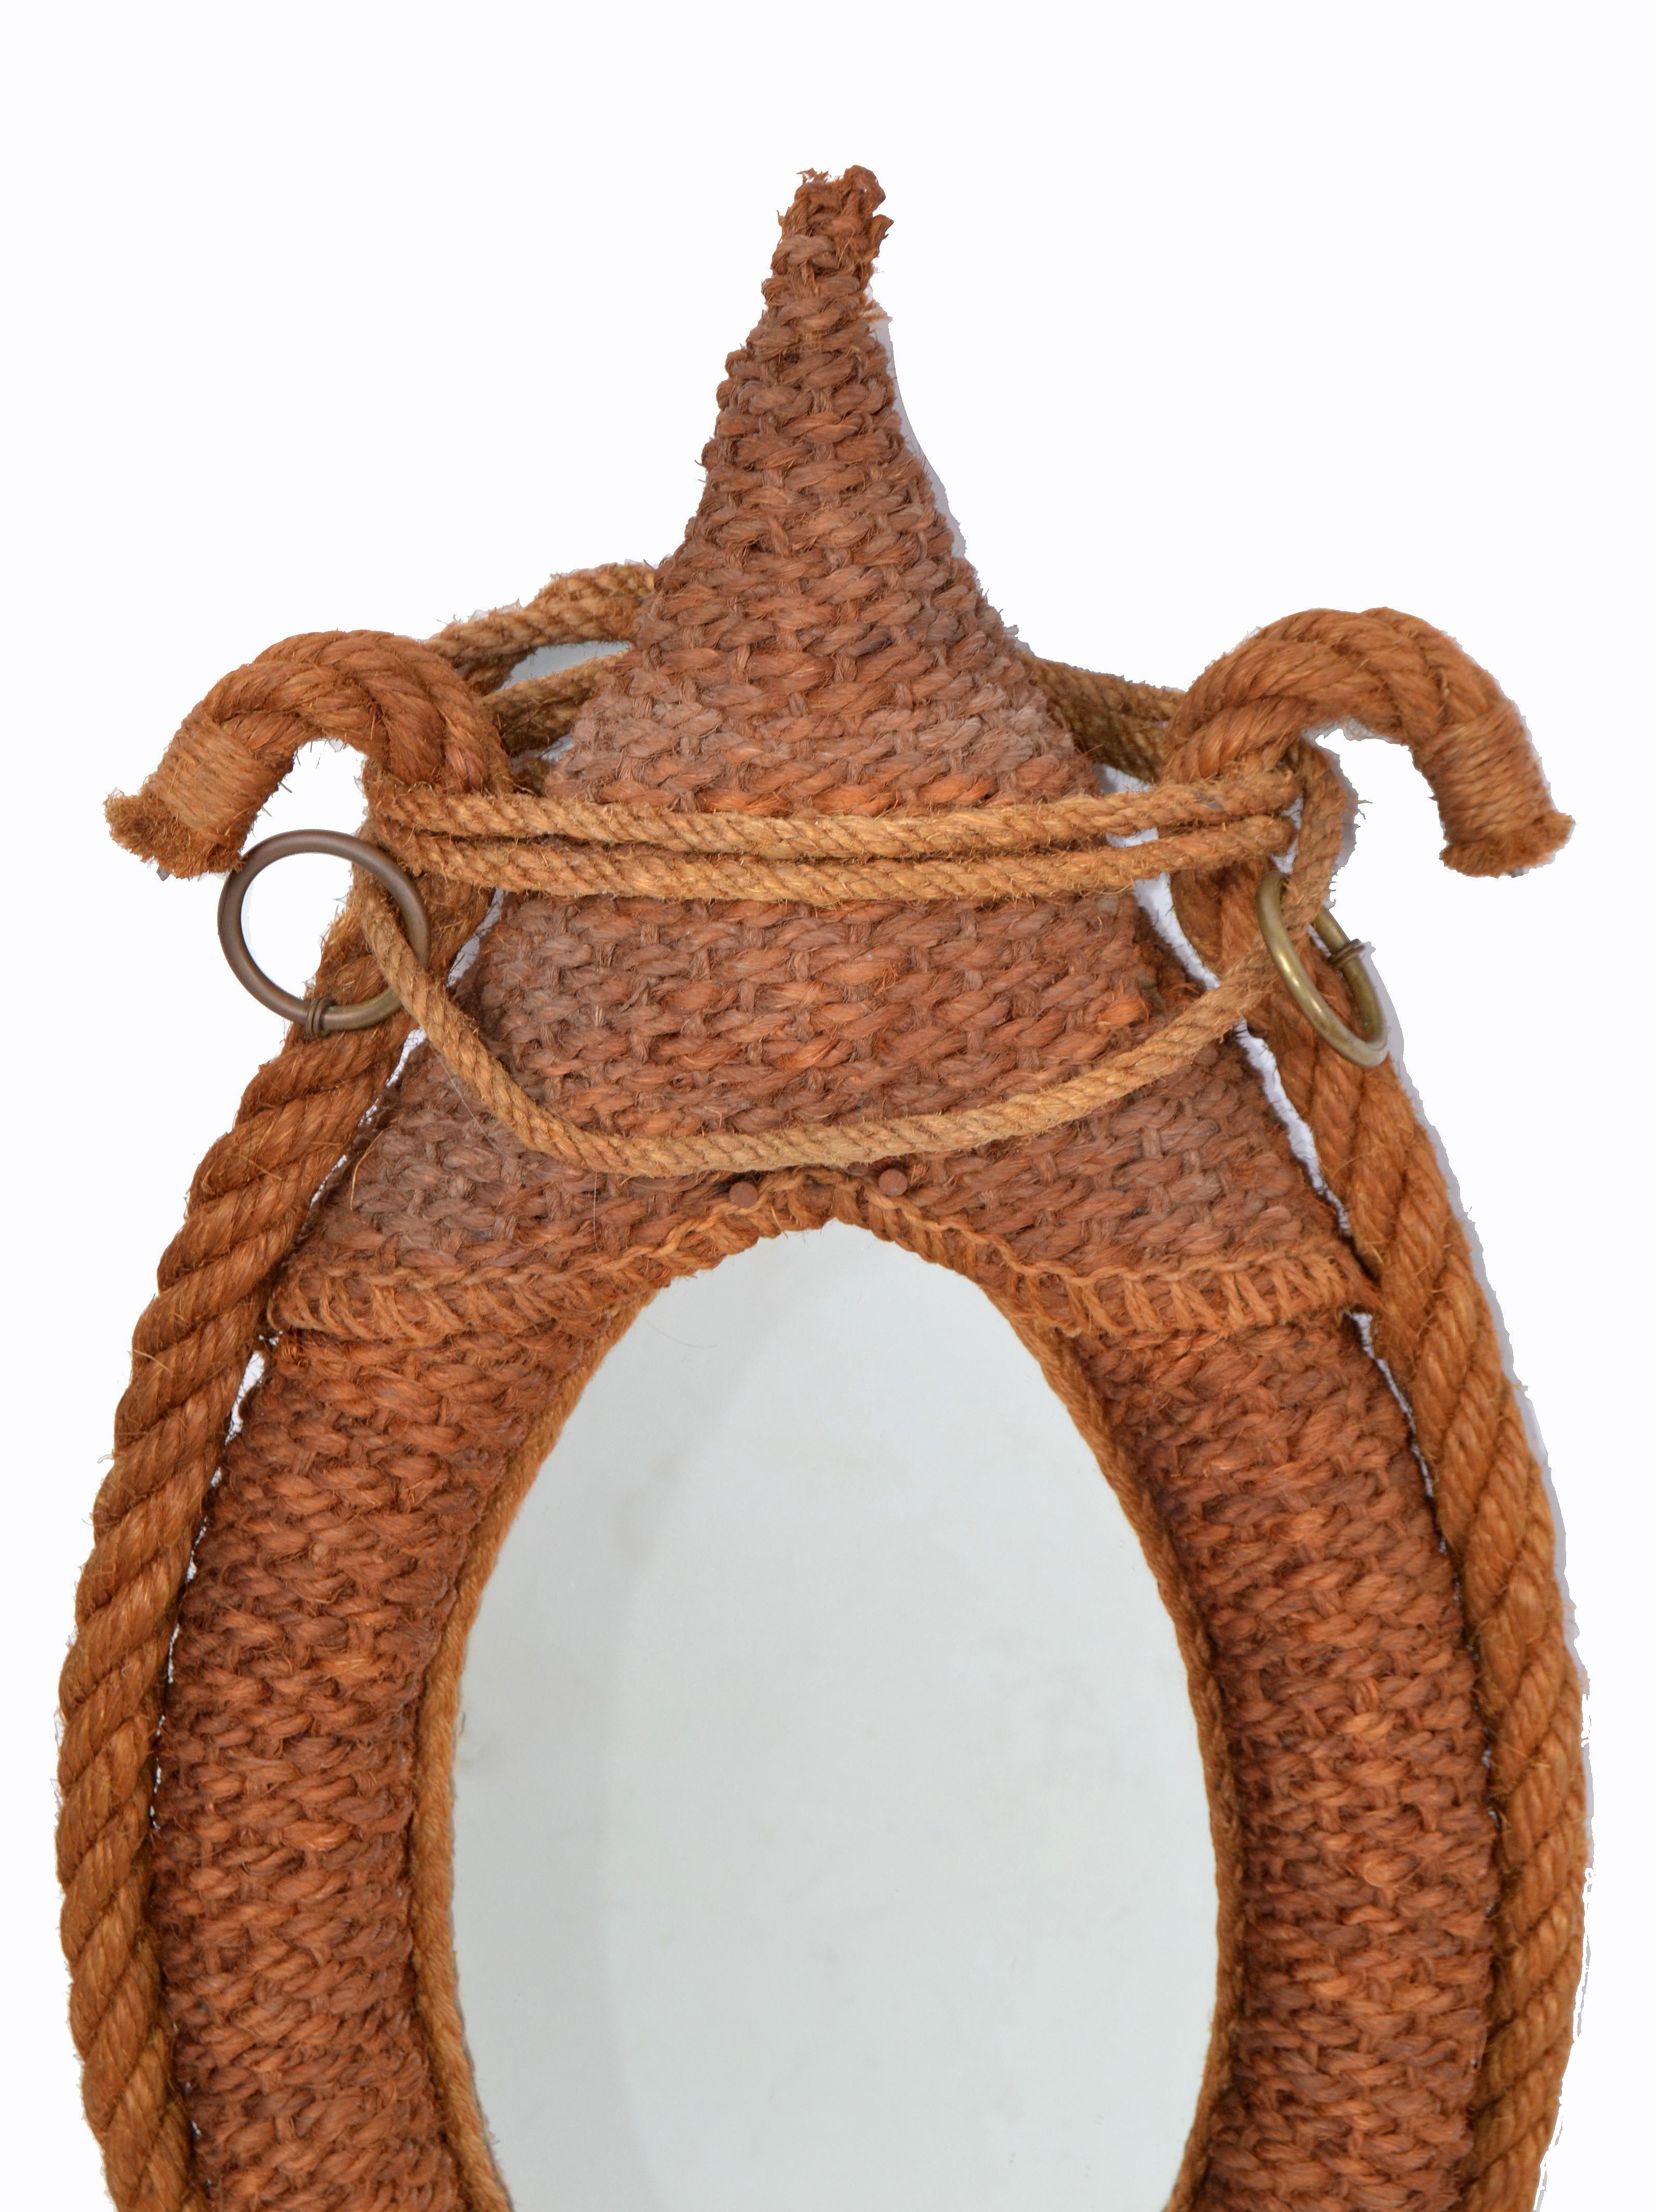 20th Century Audoux Minet Style Oval Wall Mirror Nautical French Provincial Rope & Jute For Sale